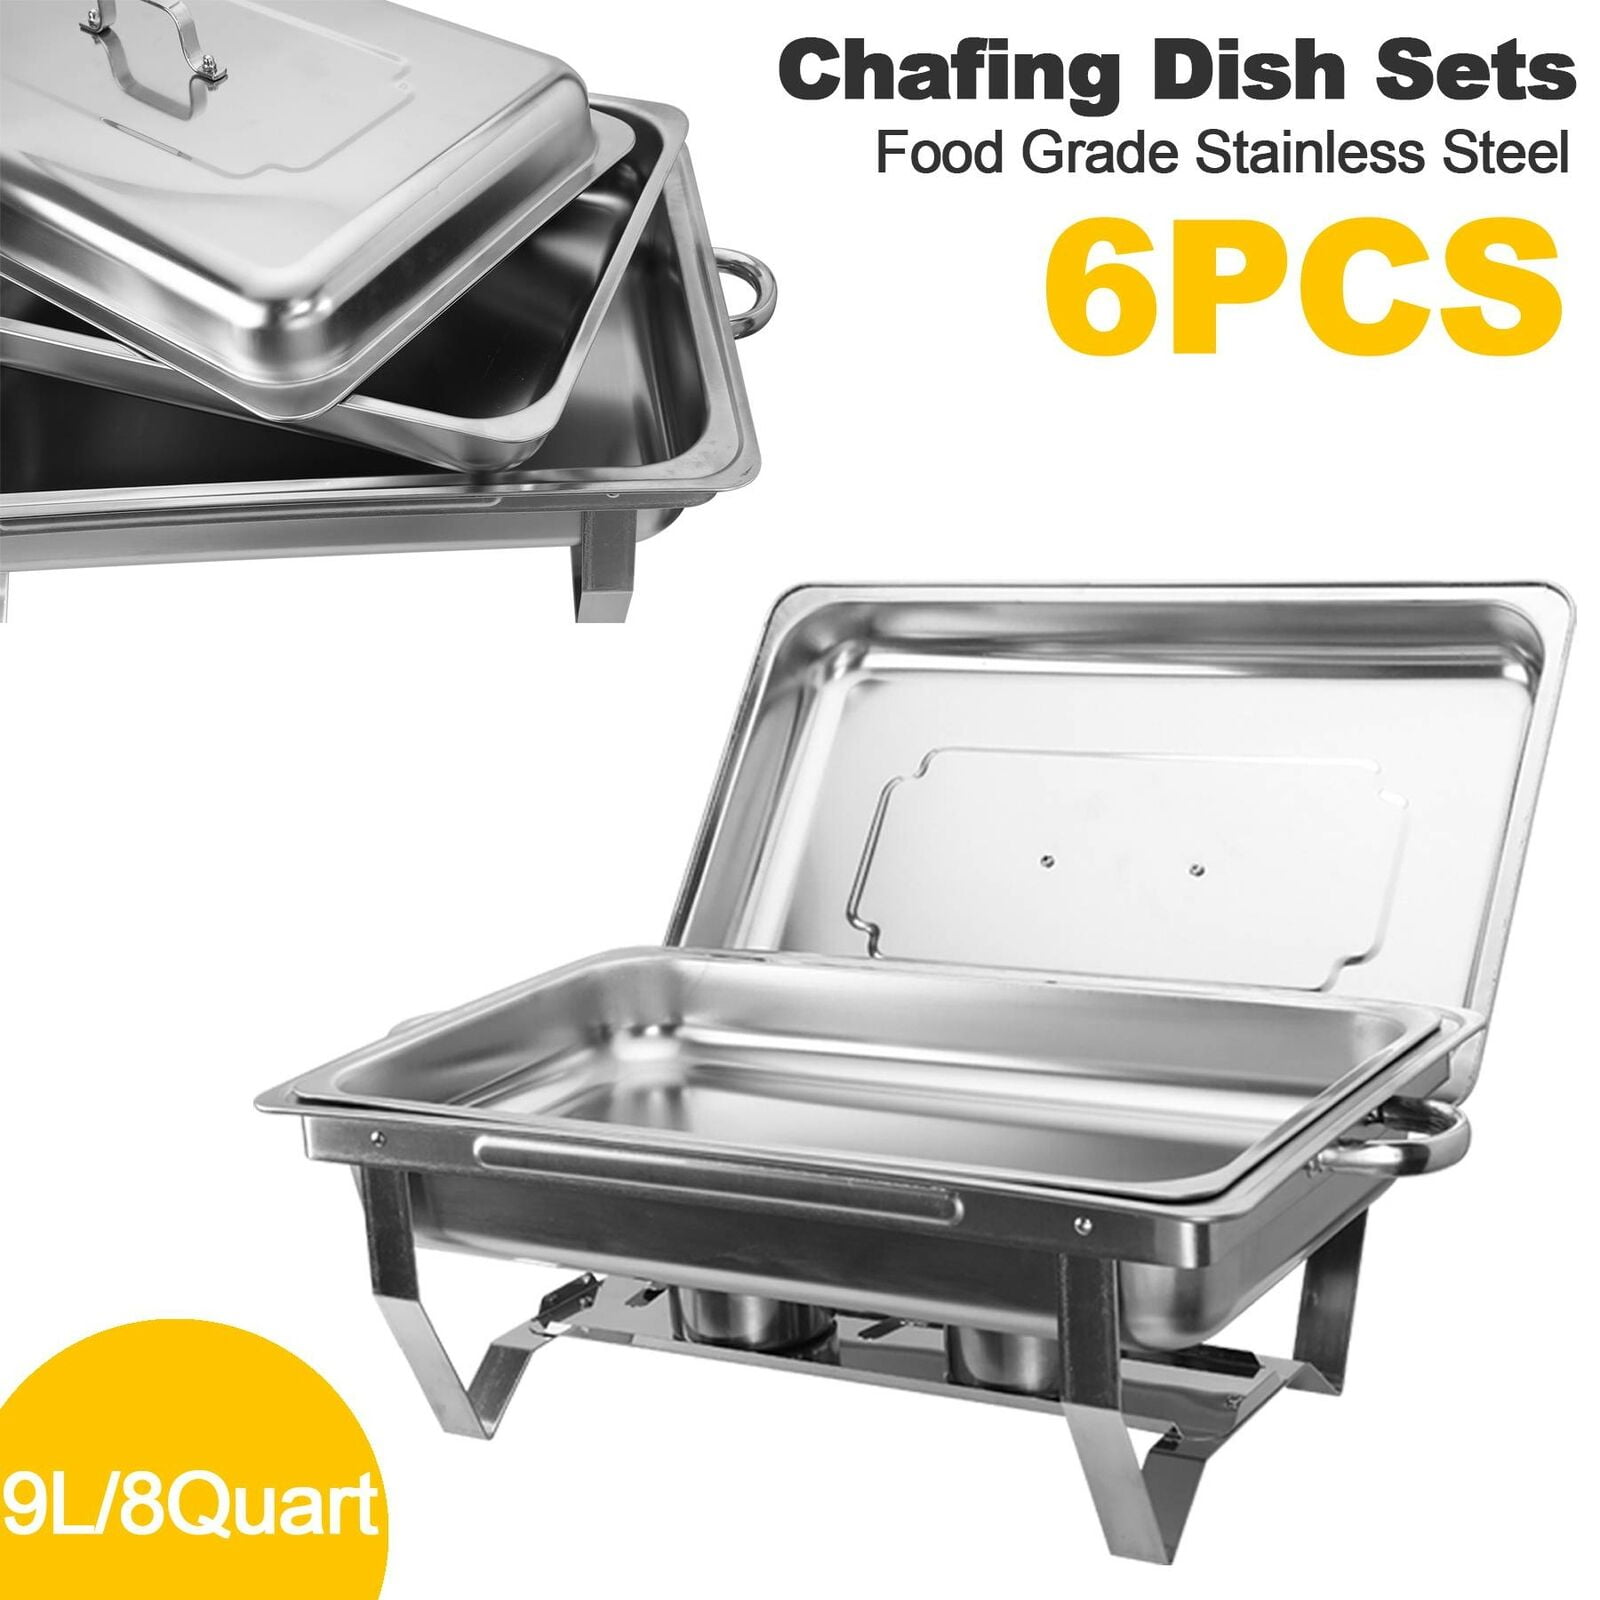 Details about   9L 1 Plate Catering Classic Stainless Steel Chafer Chafing Dish Food Tray Set 